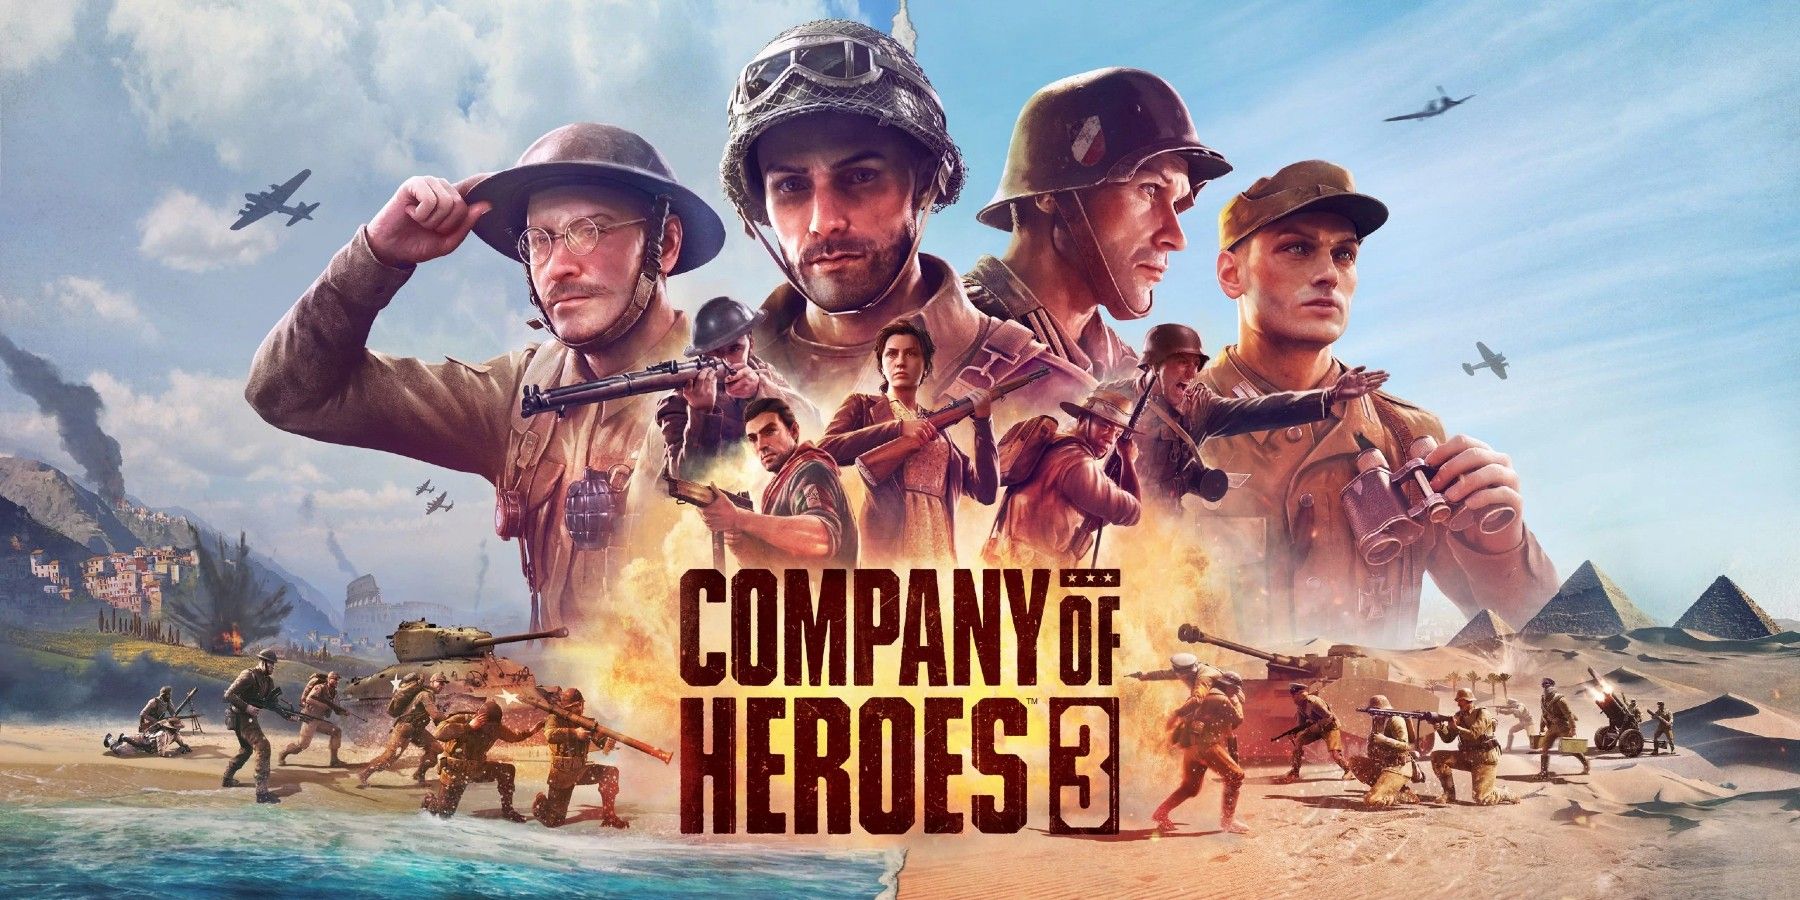 Company of Heroes 3 Trailer Details the Game's Features